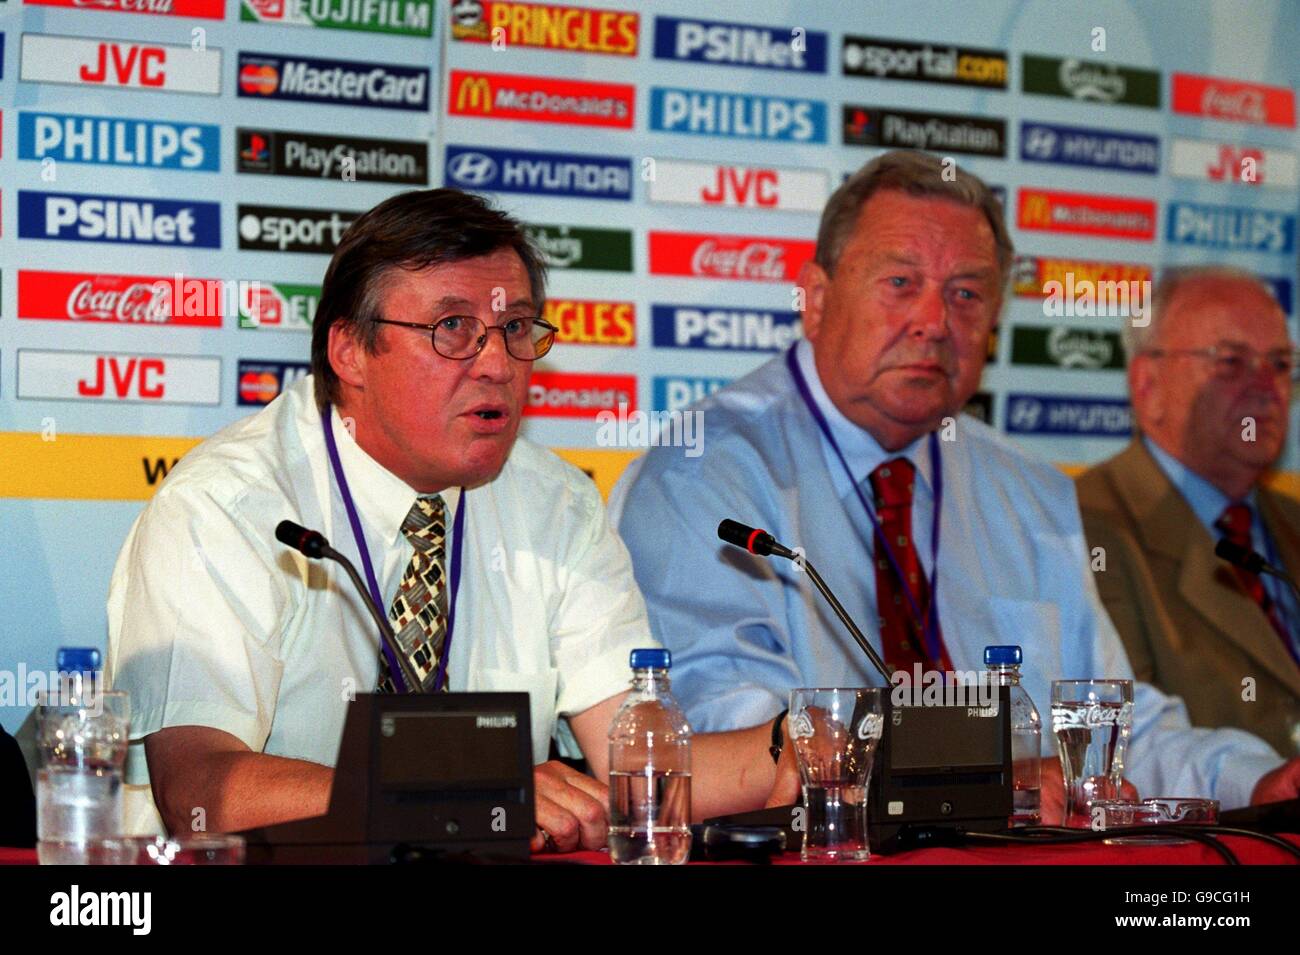 UEFA's Chief Executive Gerhard Aigner (L) and the President of UEFA Lennart Johansson (R) discuss their stance on the English football hooligans at a press conference at Liege this evening Stock Photo